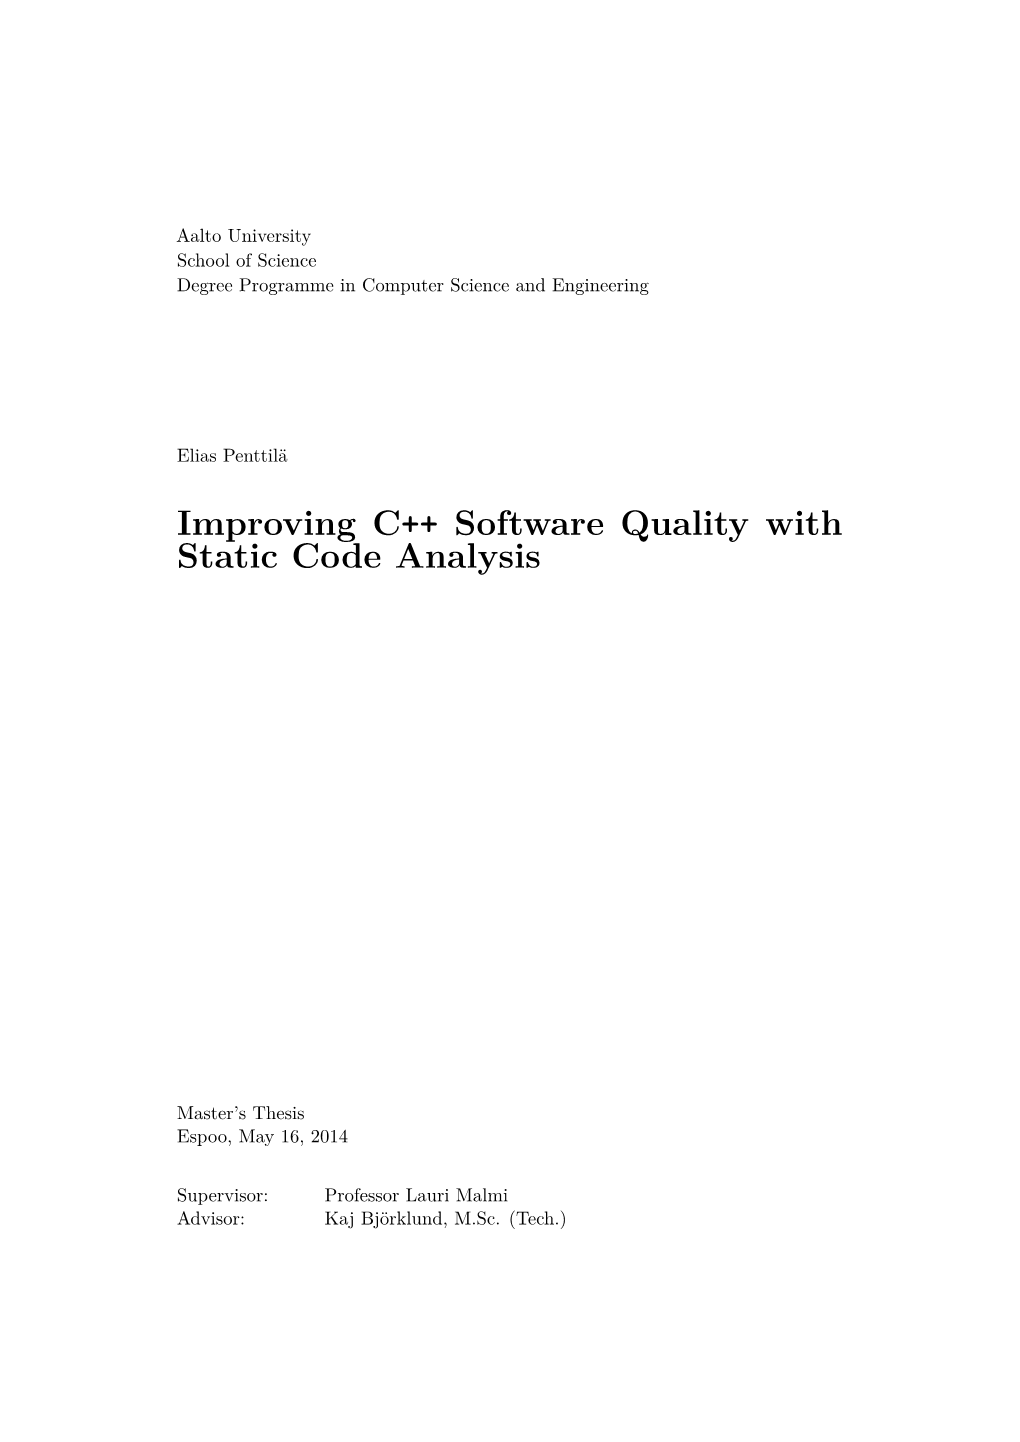 Improving C++ Software Quality with Static Code Analysis